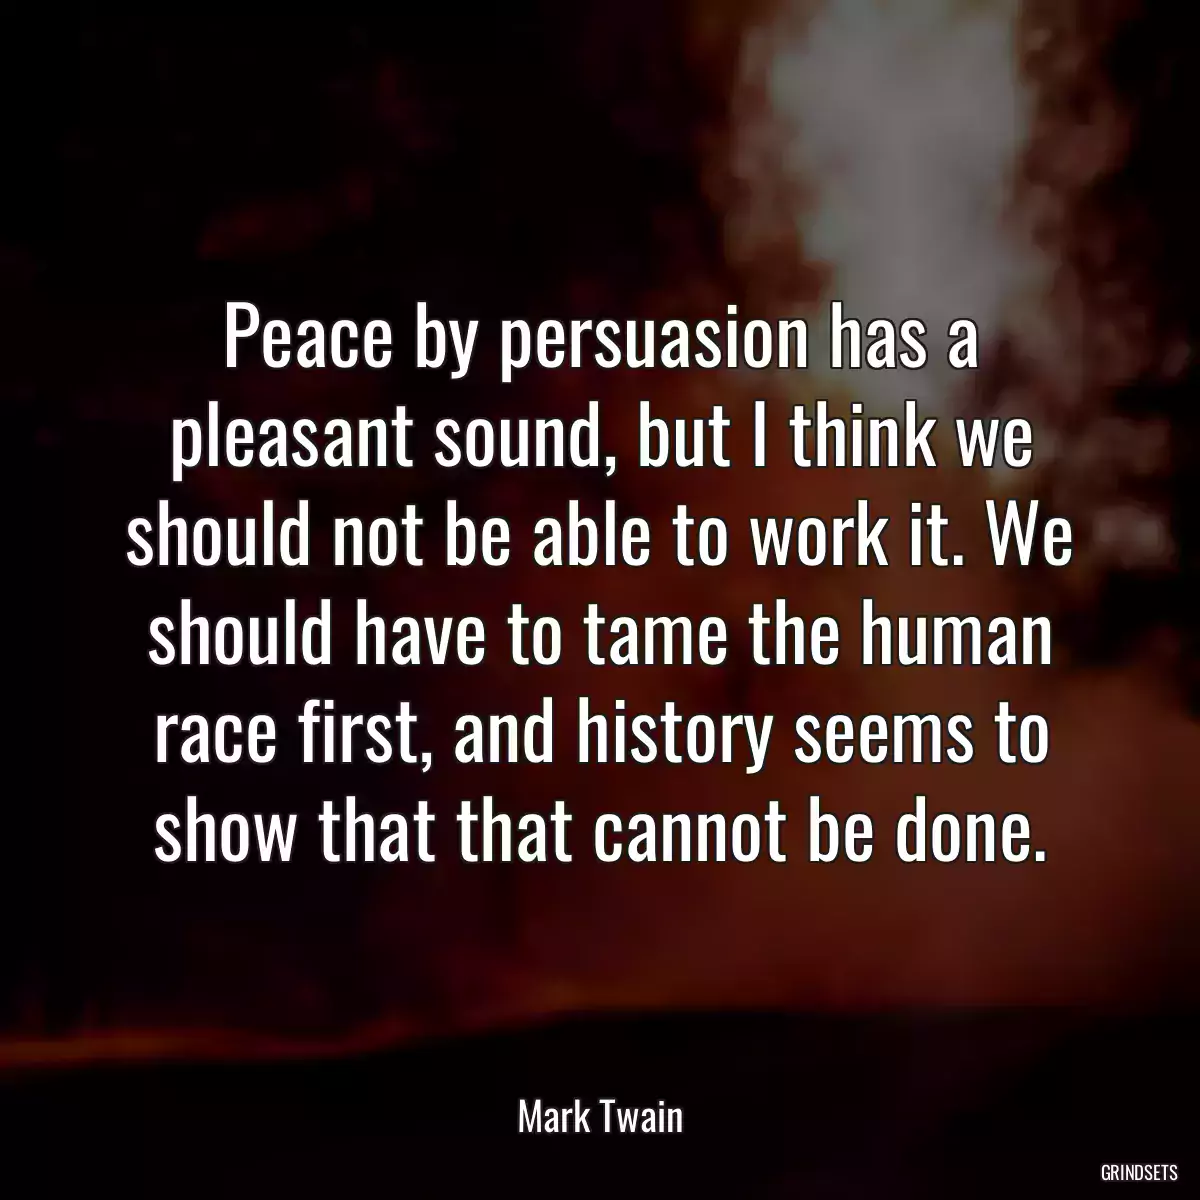 Peace by persuasion has a pleasant sound, but I think we should not be able to work it. We should have to tame the human race first, and history seems to show that that cannot be done.